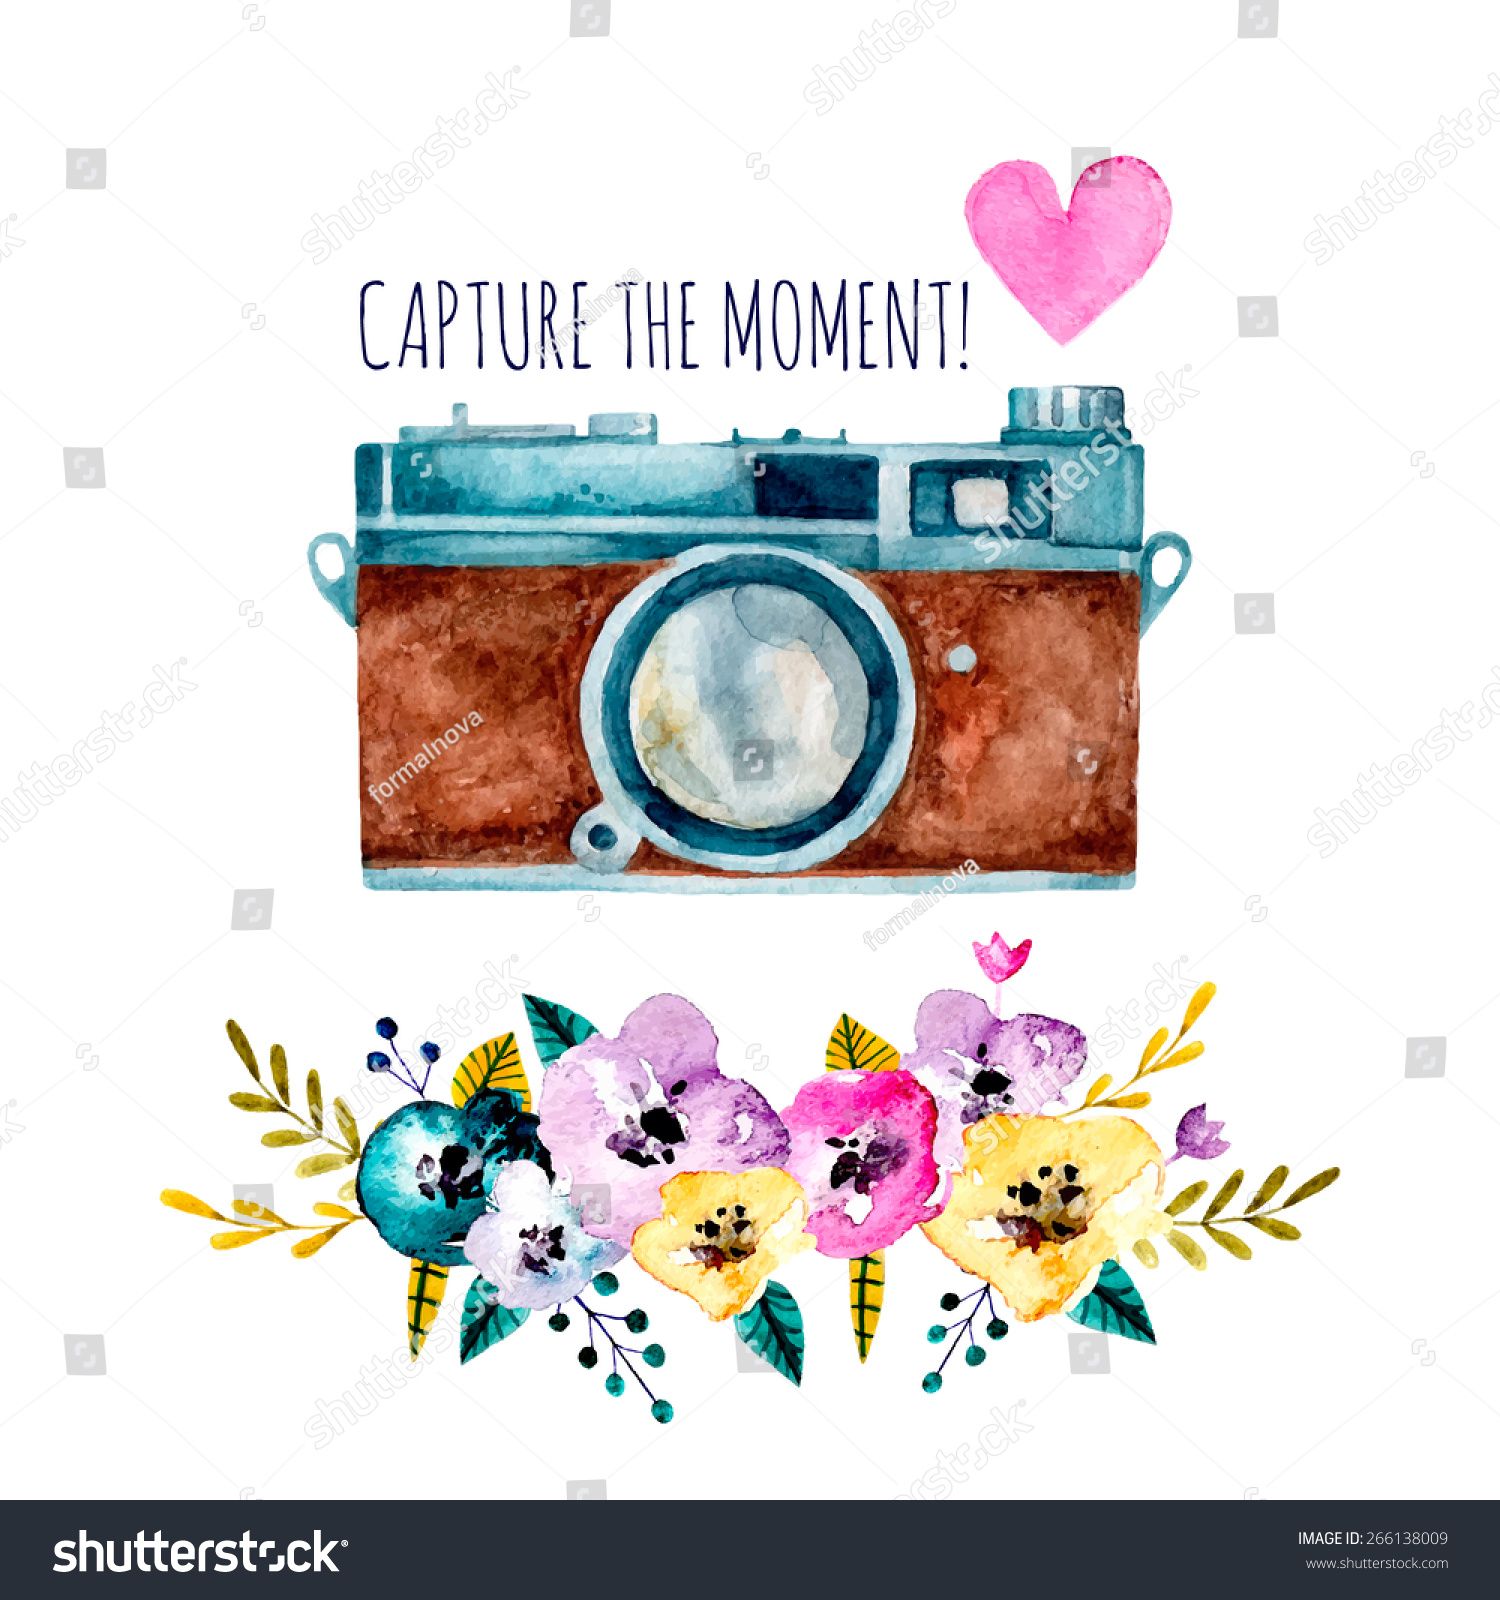 Capture Moment Vintage Watercolor Camera Flowers Stock Photo (Photo ...